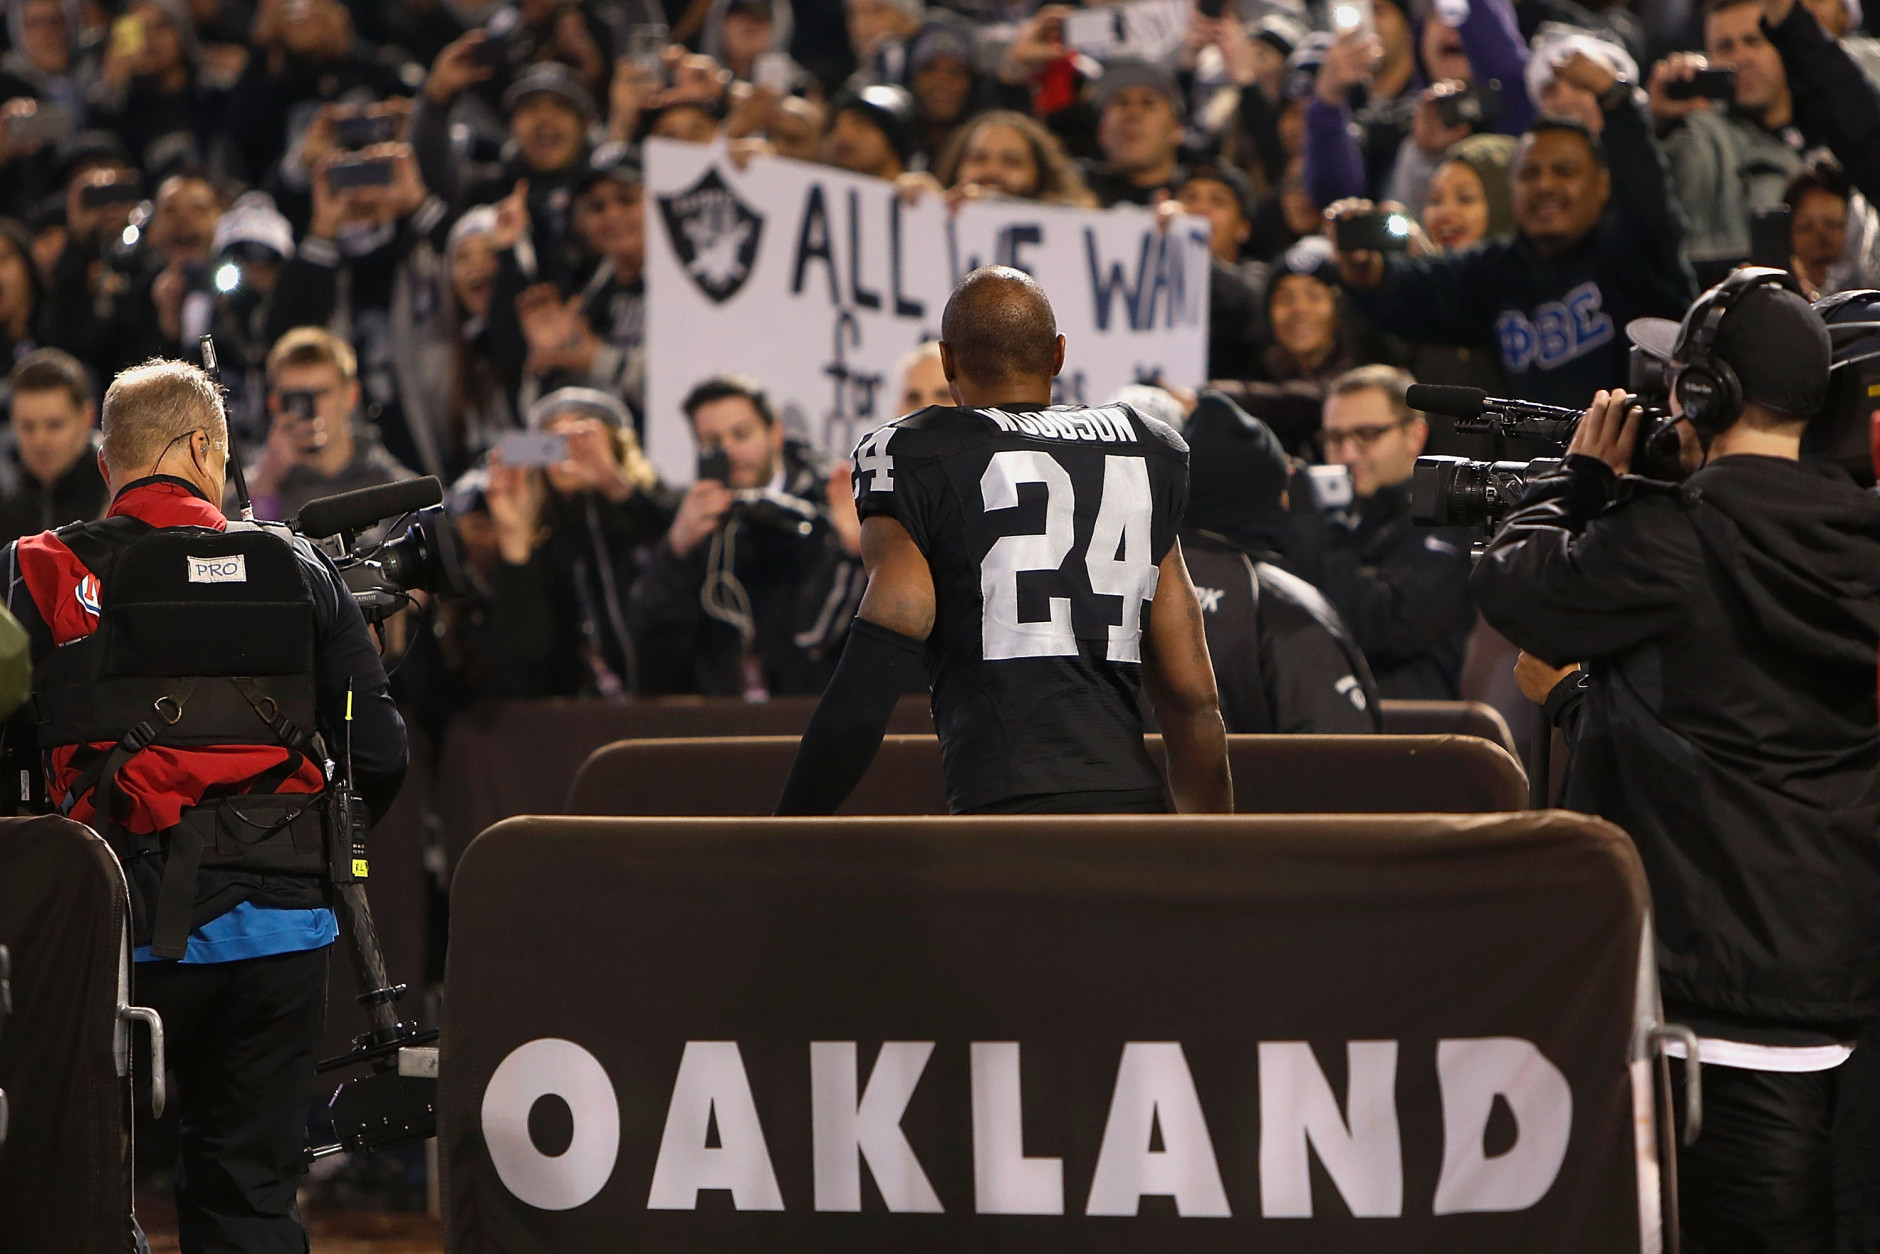 OAKLAND, CA - DECEMBER 24: Charles Woodson #24 of the Oakland Raiders enters the field before the game against the San Diego Chargers at O.co Coliseum on December 24, 2015 in Oakland, California.  (Photo by Lachlan Cunningham/Getty Images)